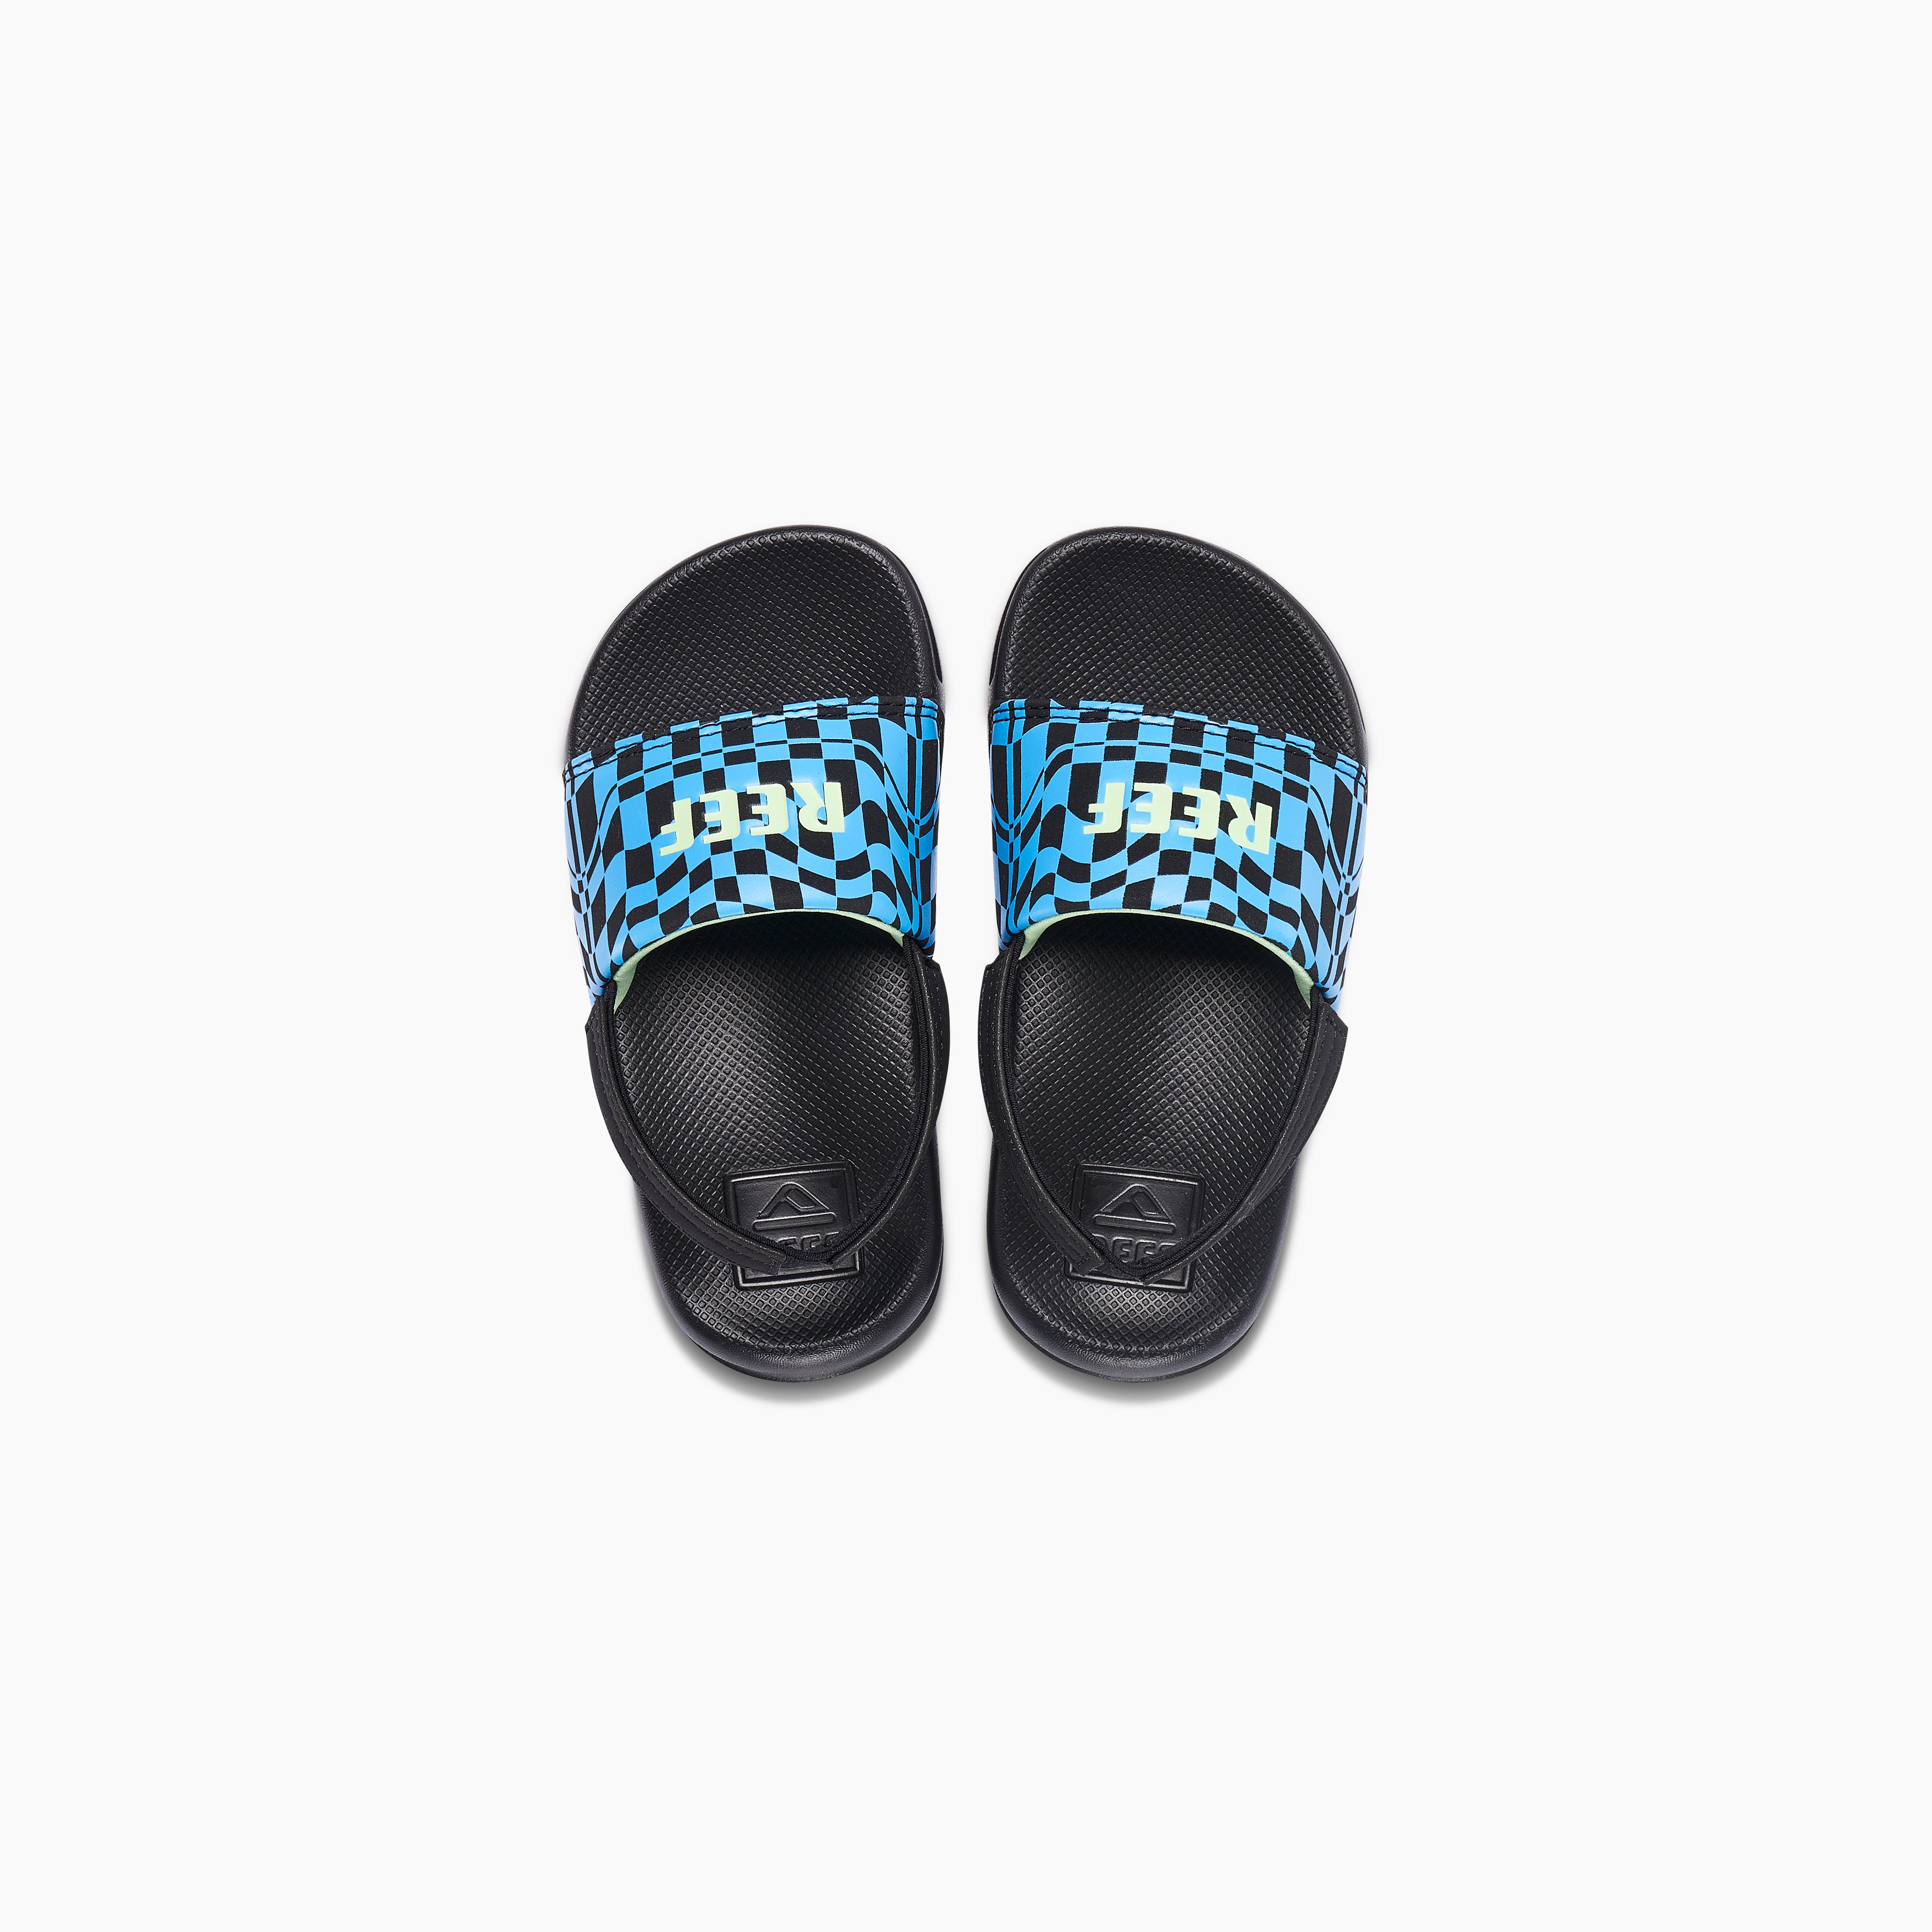 Toddler Boy's One Slide in Swell Checkers | REEF®